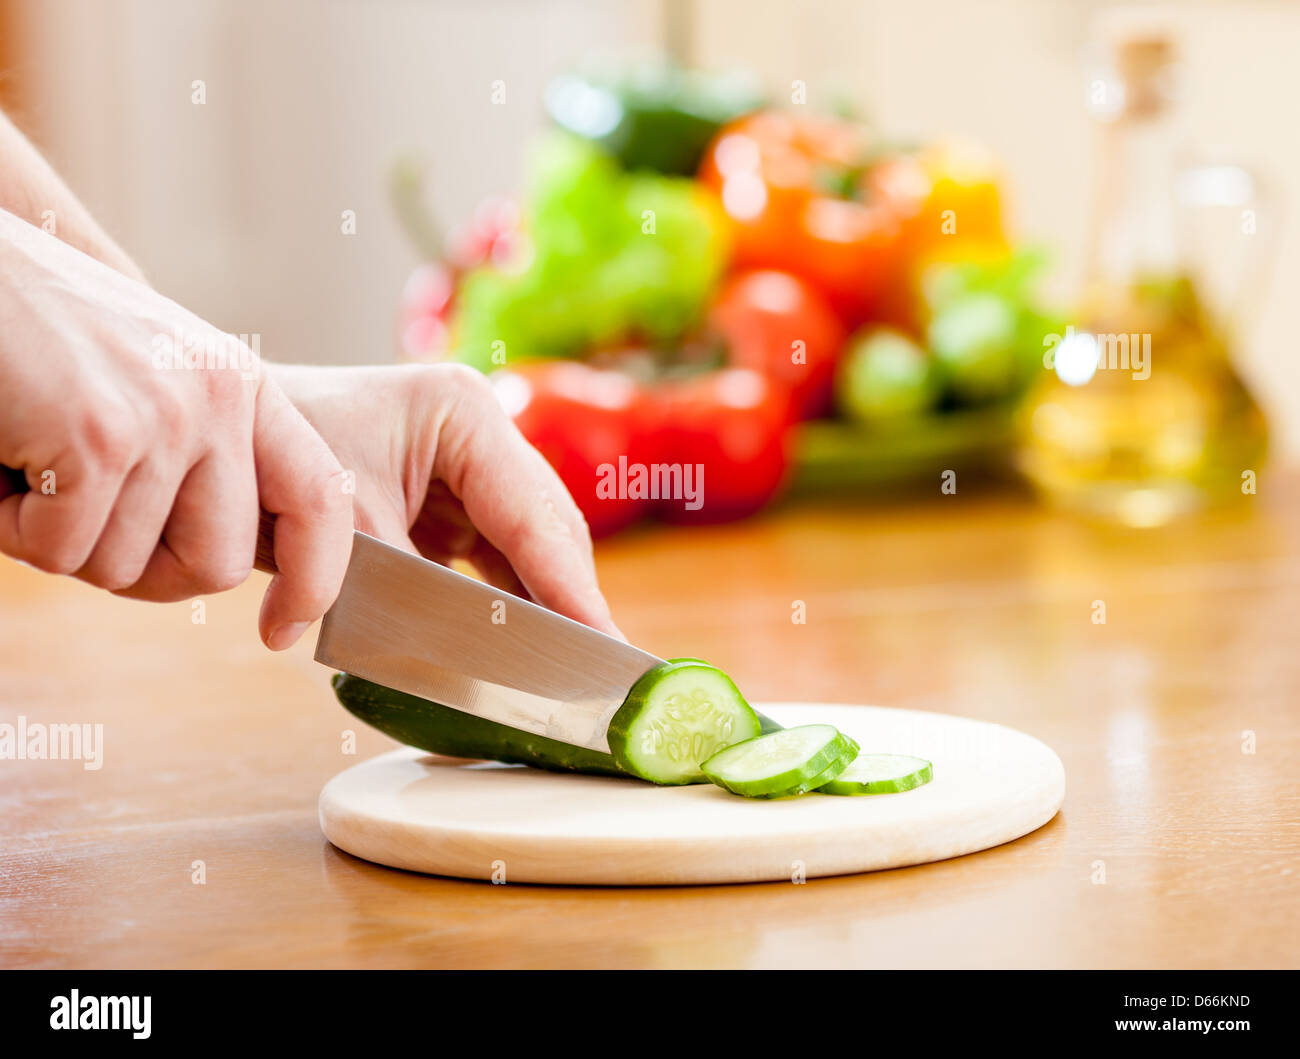 Hands with healthy food fresh vegetables Stock Photo